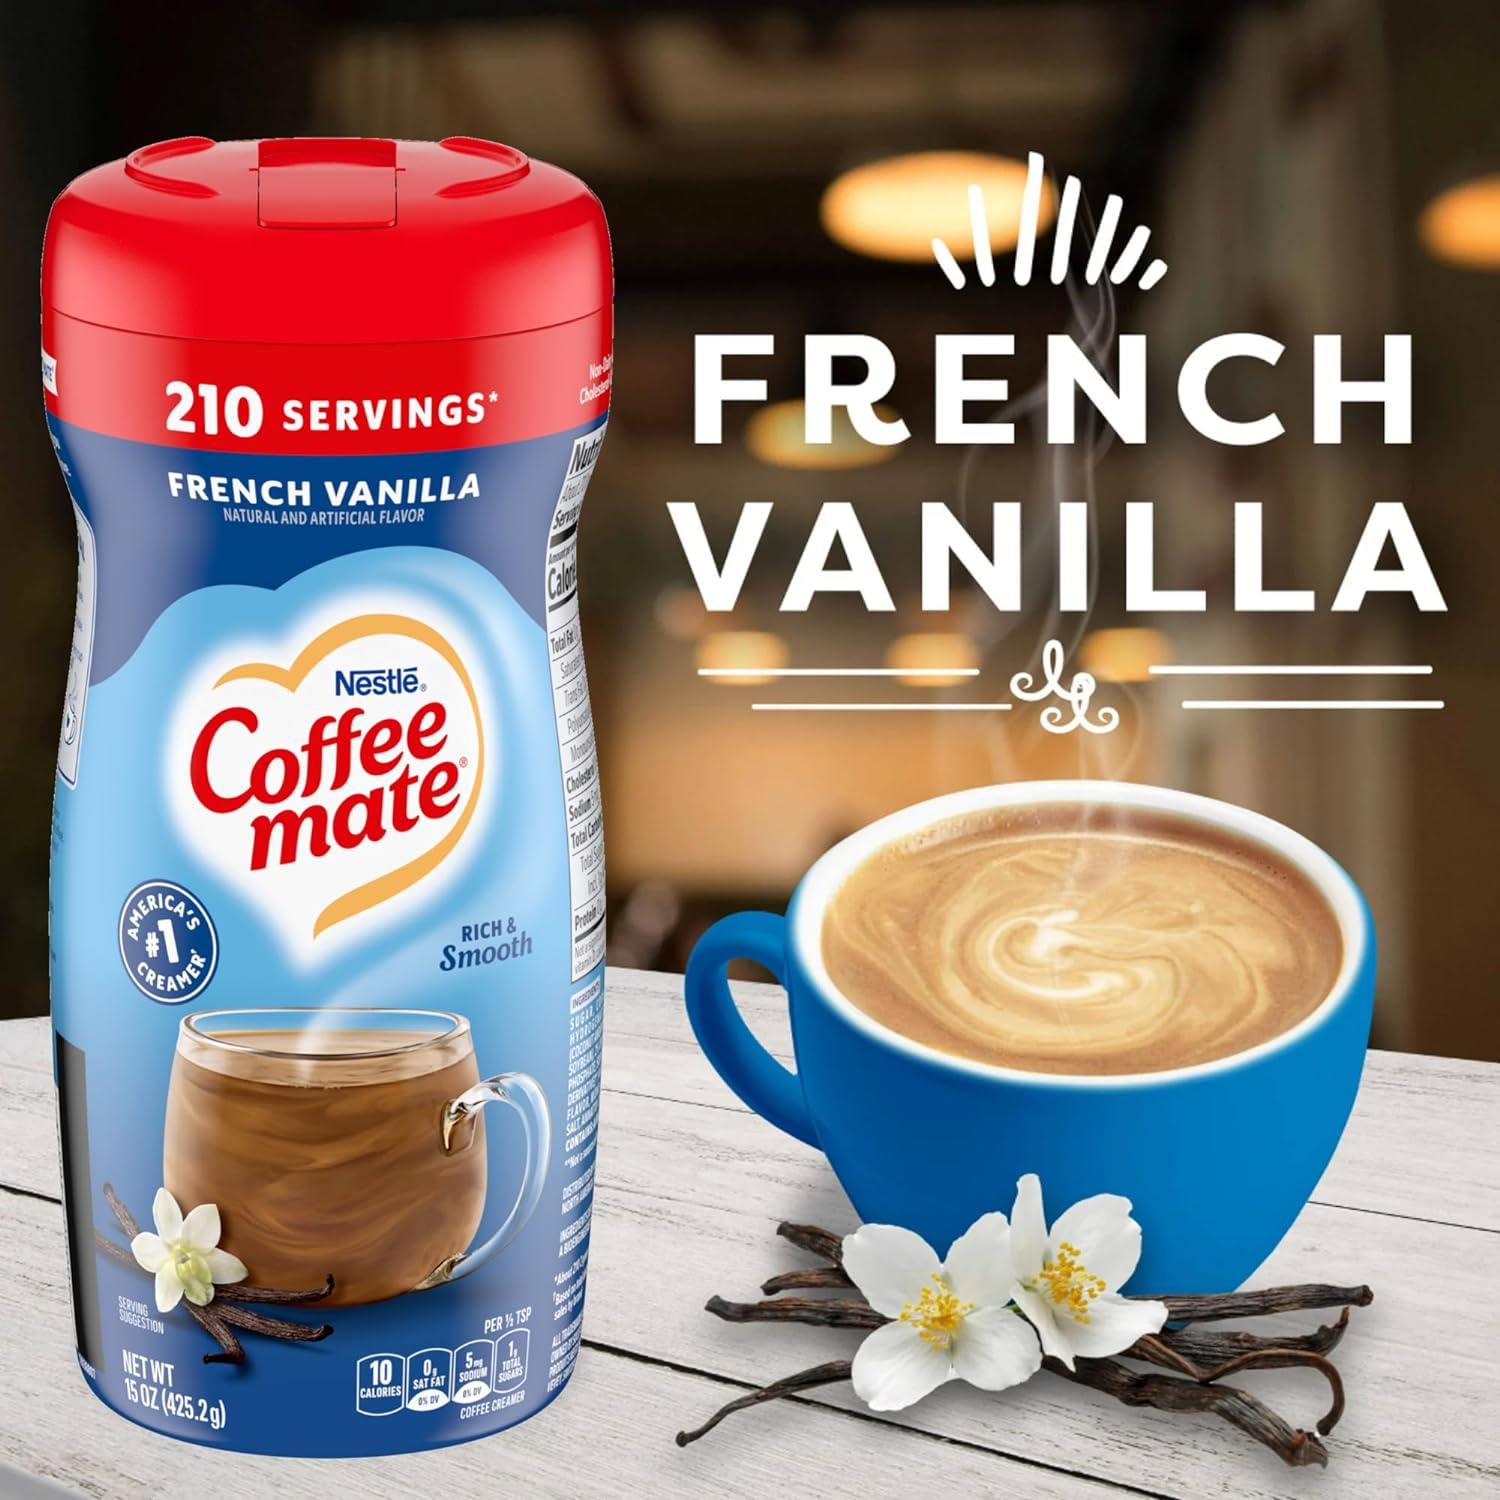 Coffee mate French Vanilla Powdered Creamer, 15 oz (Pack of 3) with By The Cup Coffee Scoop : Grocery & Gourmet Food